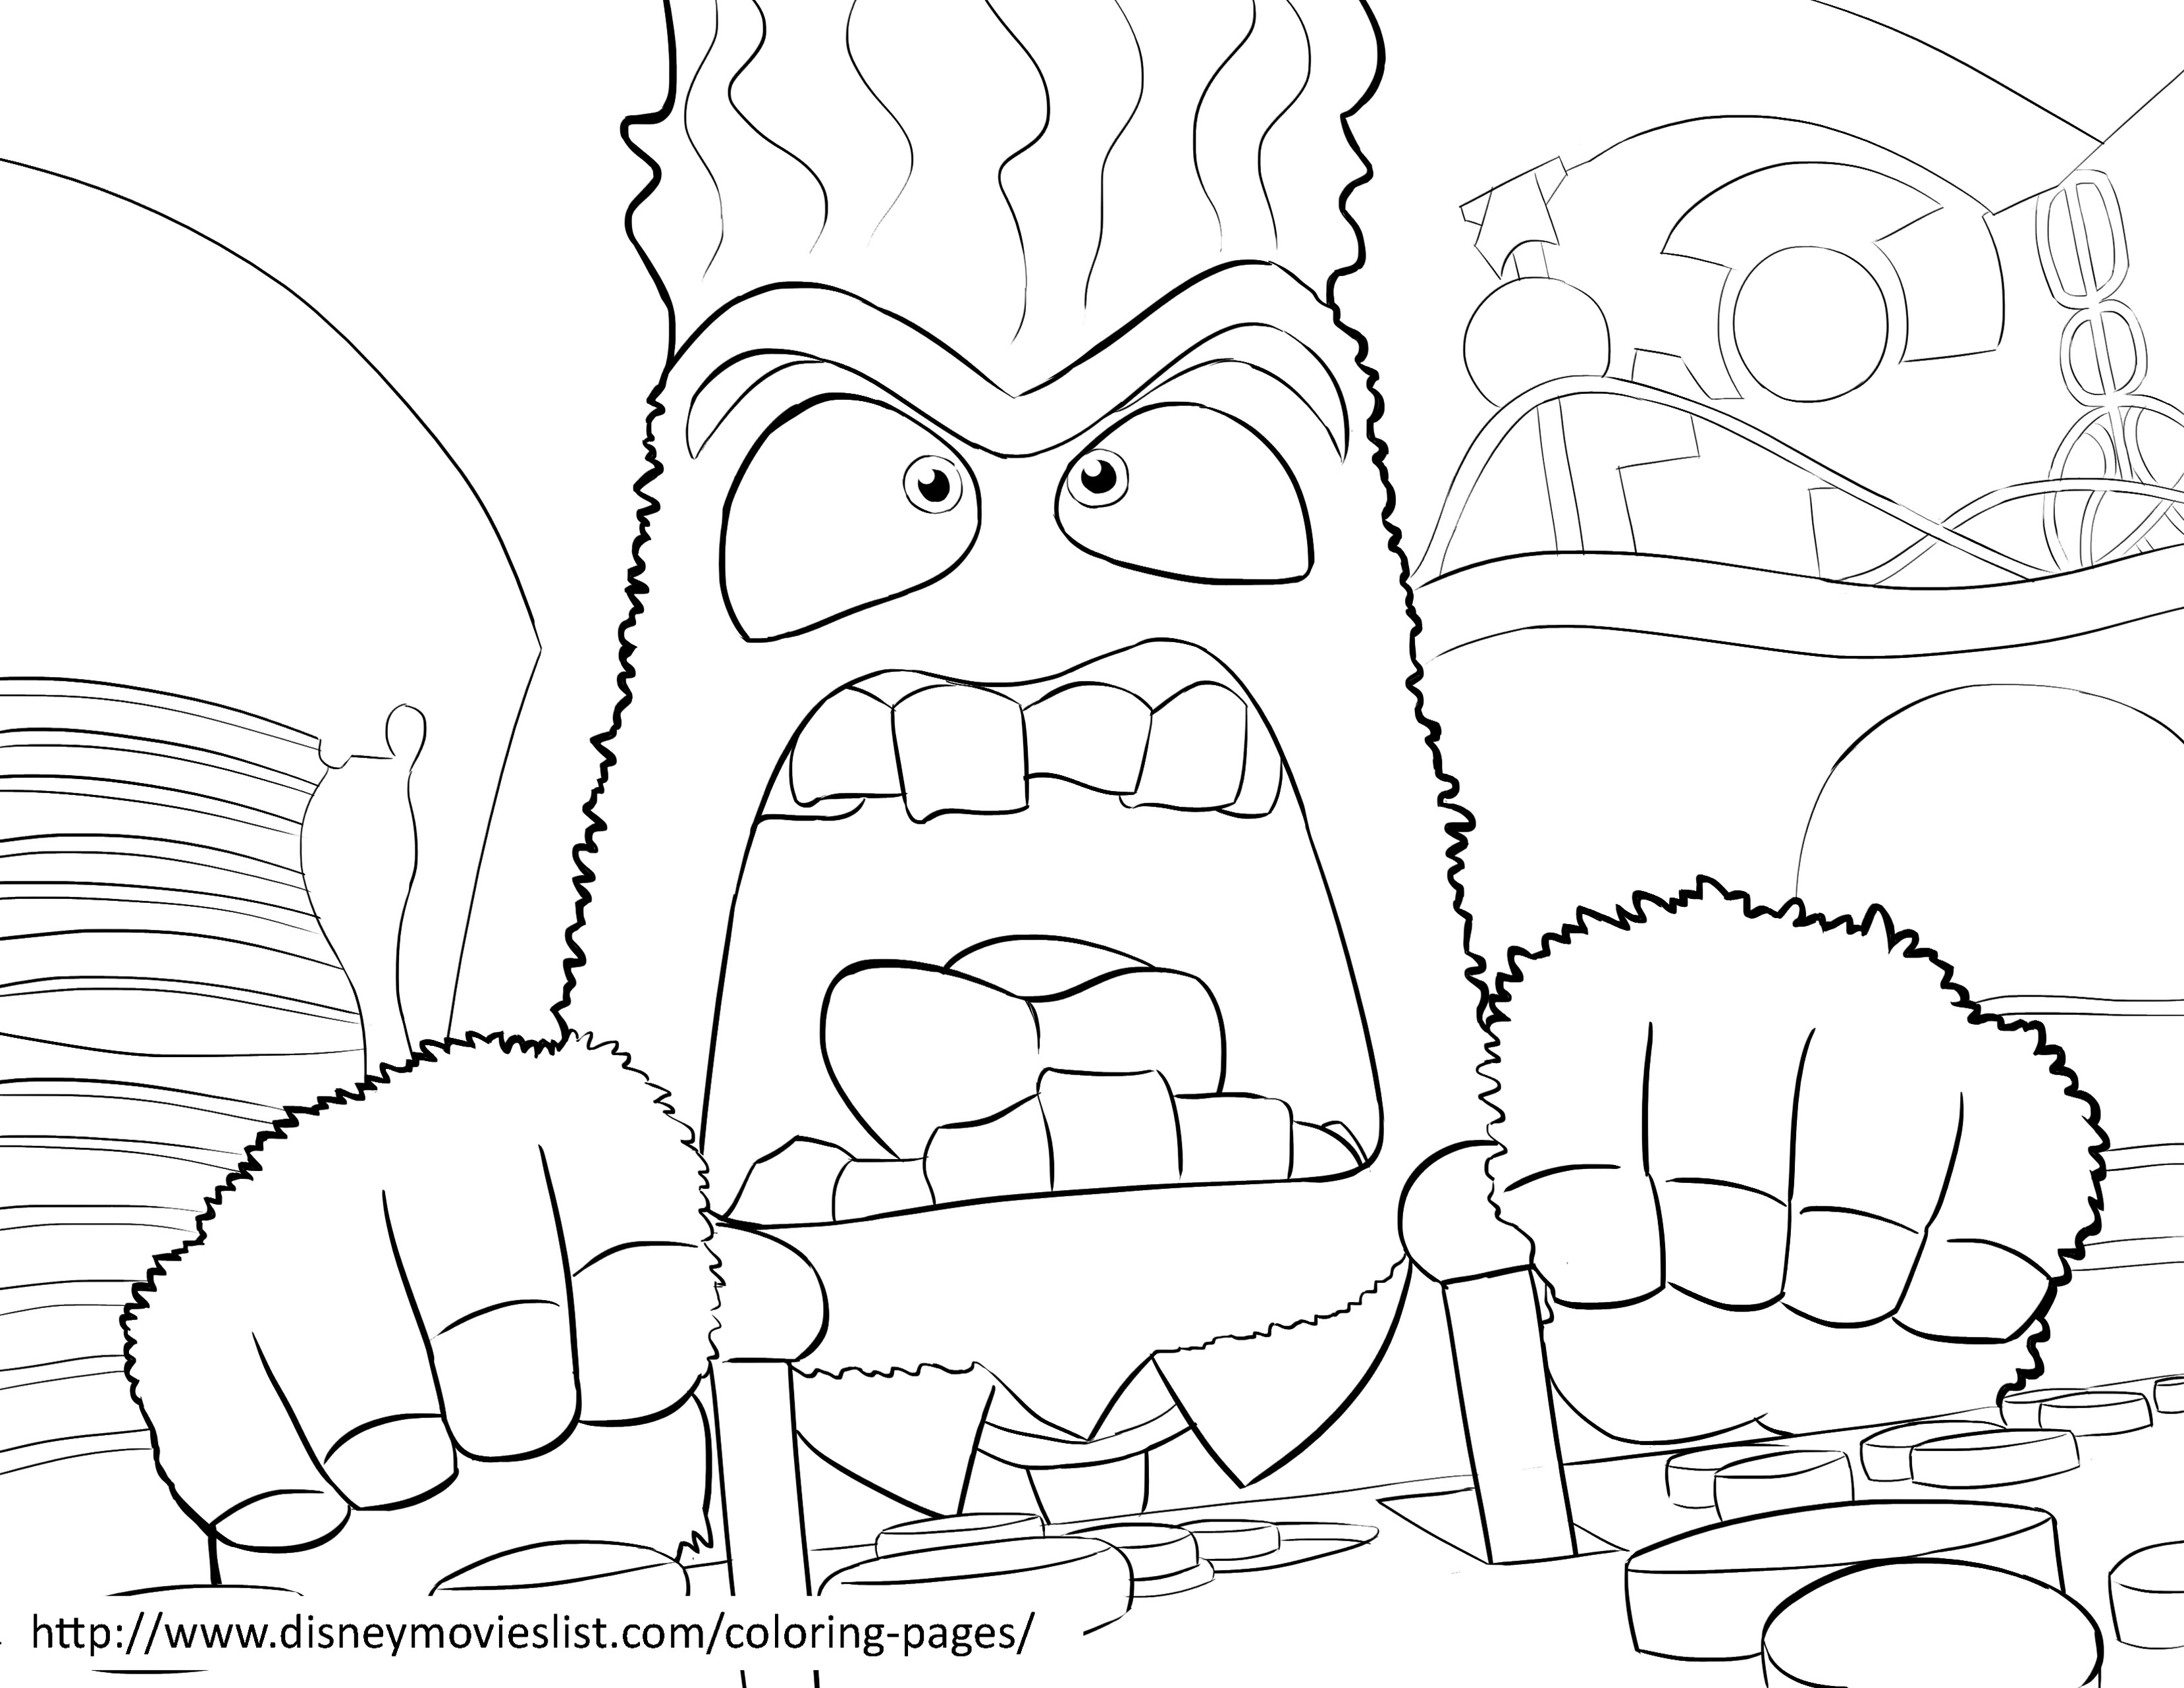 Inside Out Sadness Coloring Page Inside Out To Download For Free Inside Out Kids Coloring Pages